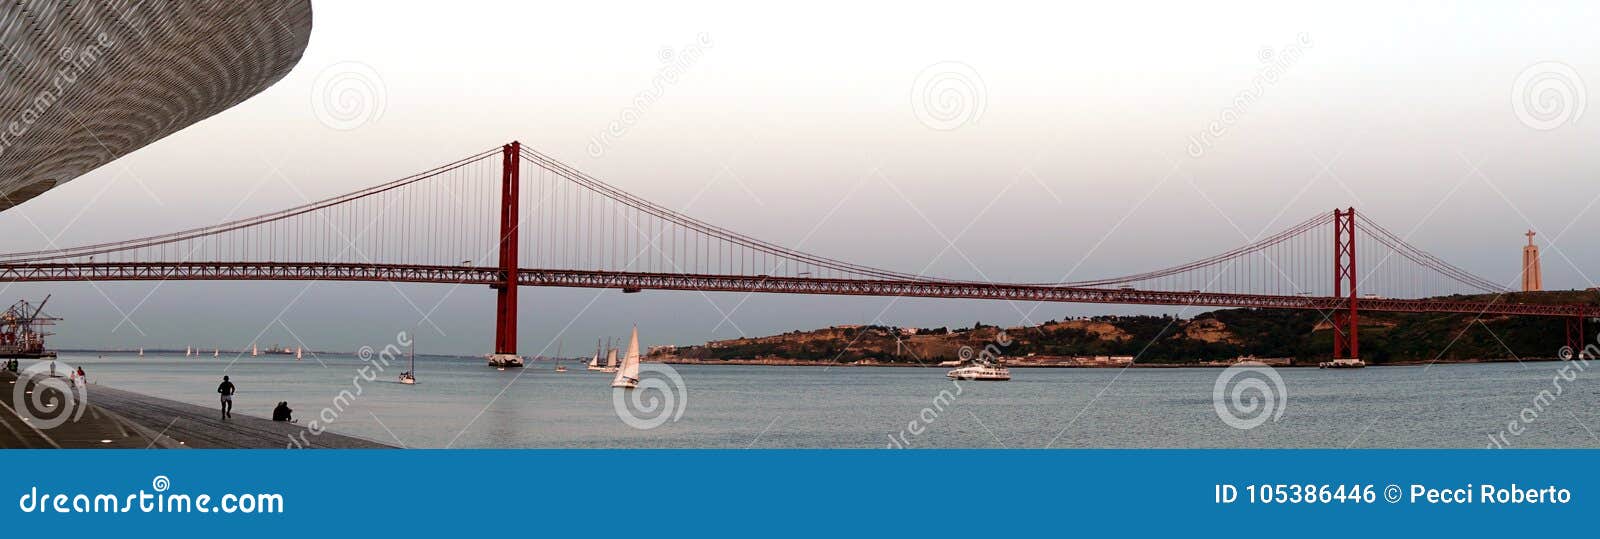 portugal, lisbon, view of the bridge and the maat museum